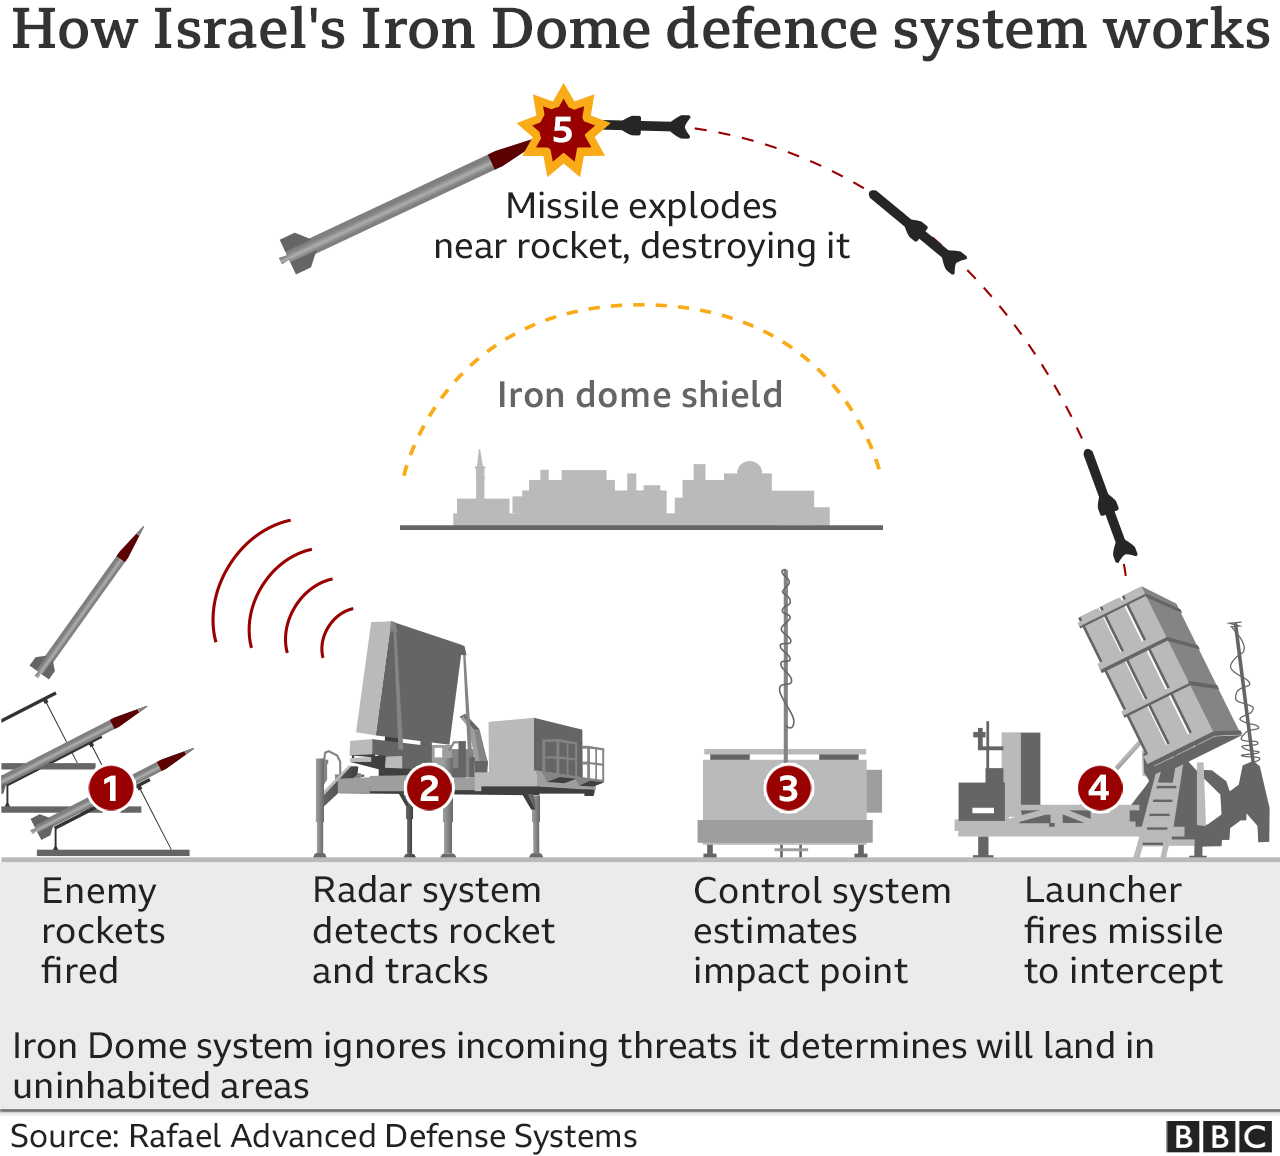 Graphic showing how Israel's Iron Dome missile defence system works